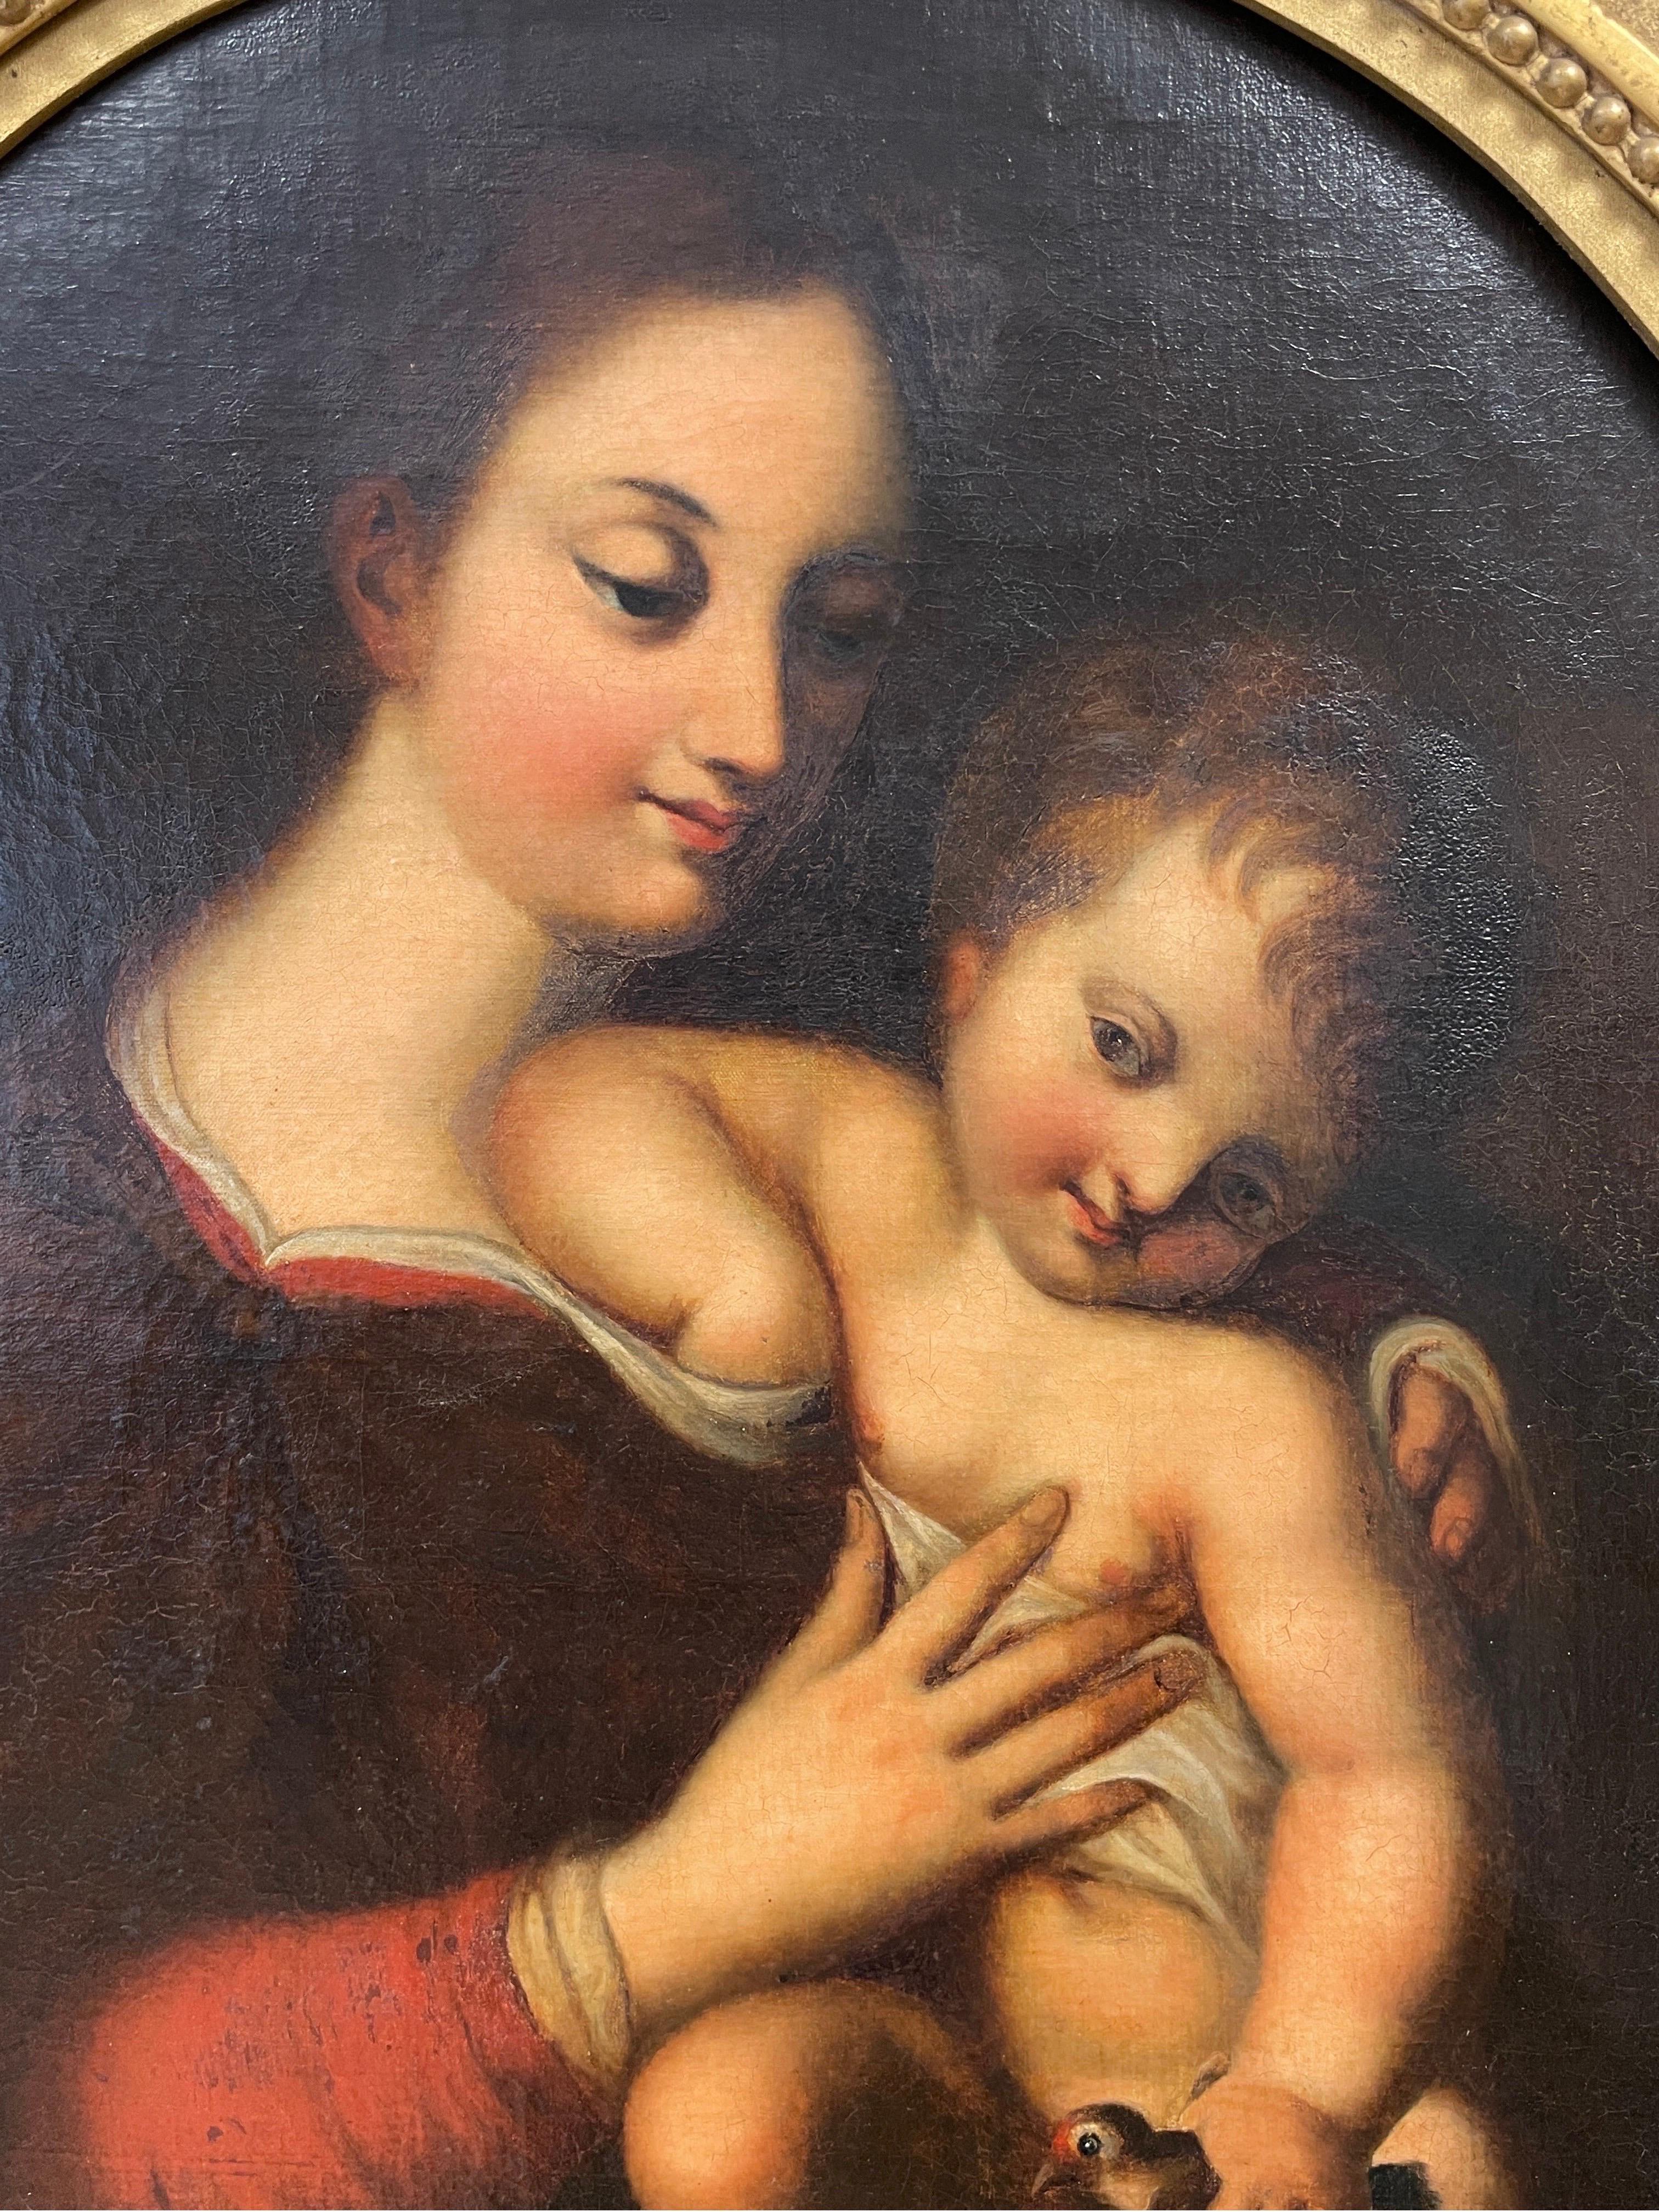 The Madonna & Child, with Goldfinch
18th century Italian School
oil painting on canvas within antique oval gilt frame
overall size: 33 x 28 inches
condition: very good indeed, the frame is included free of charge but we do not make any warranty as